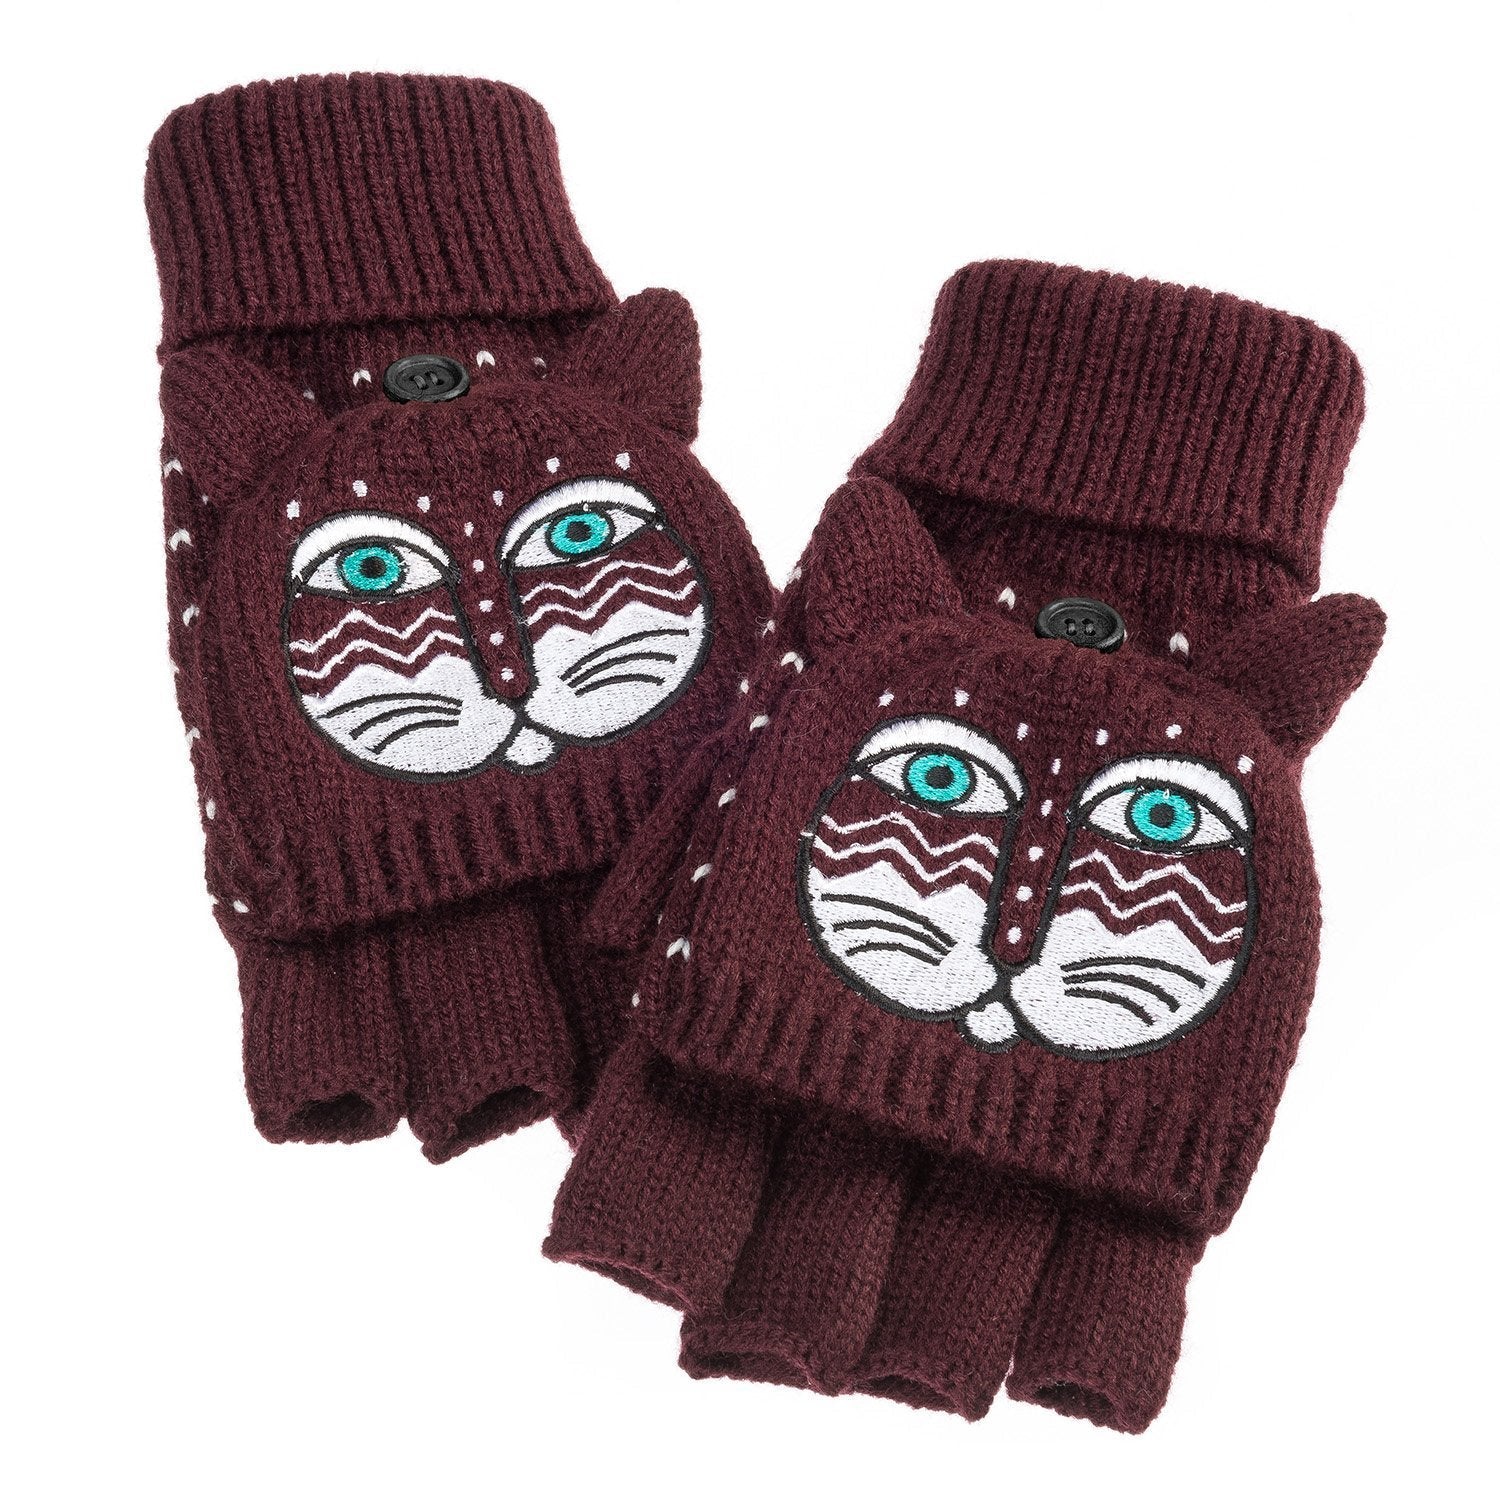 Cute Cat Themed Accessories, Burgundy Cat Mittens for Women With A Flip Cat Design